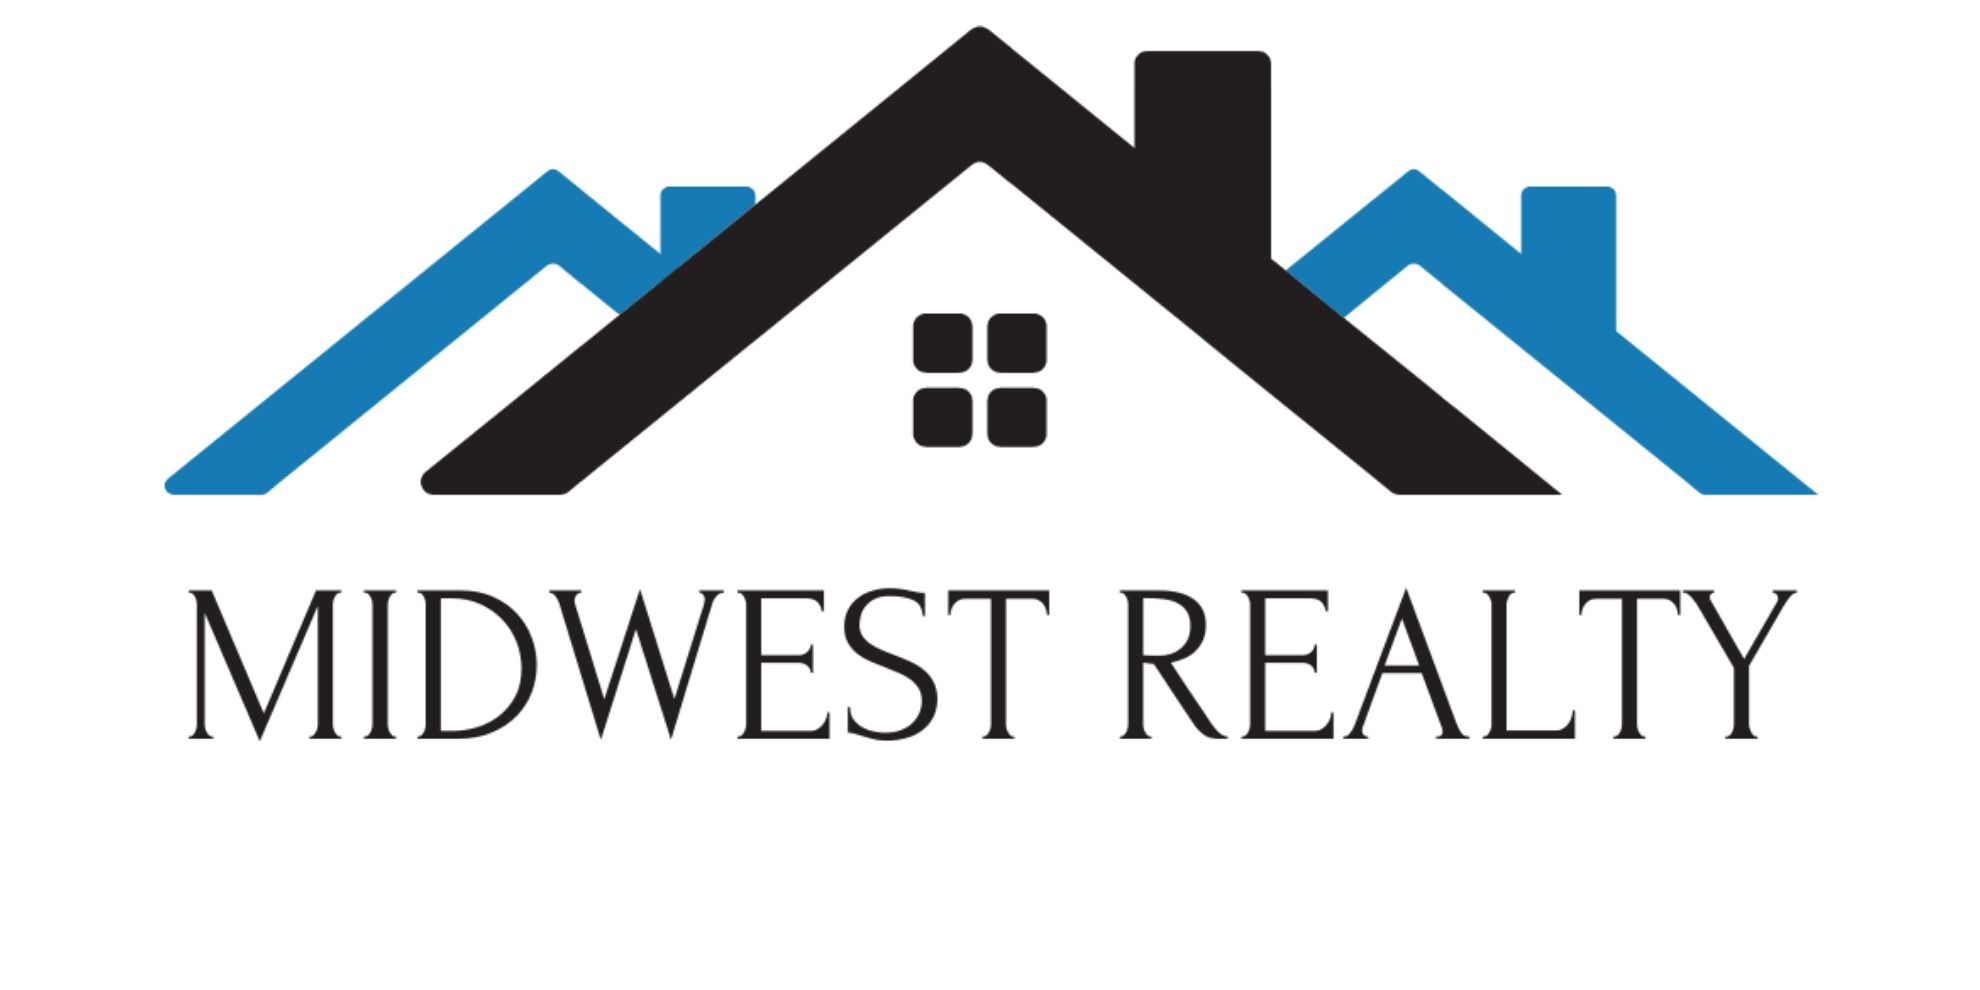 MIDWEST REALTY